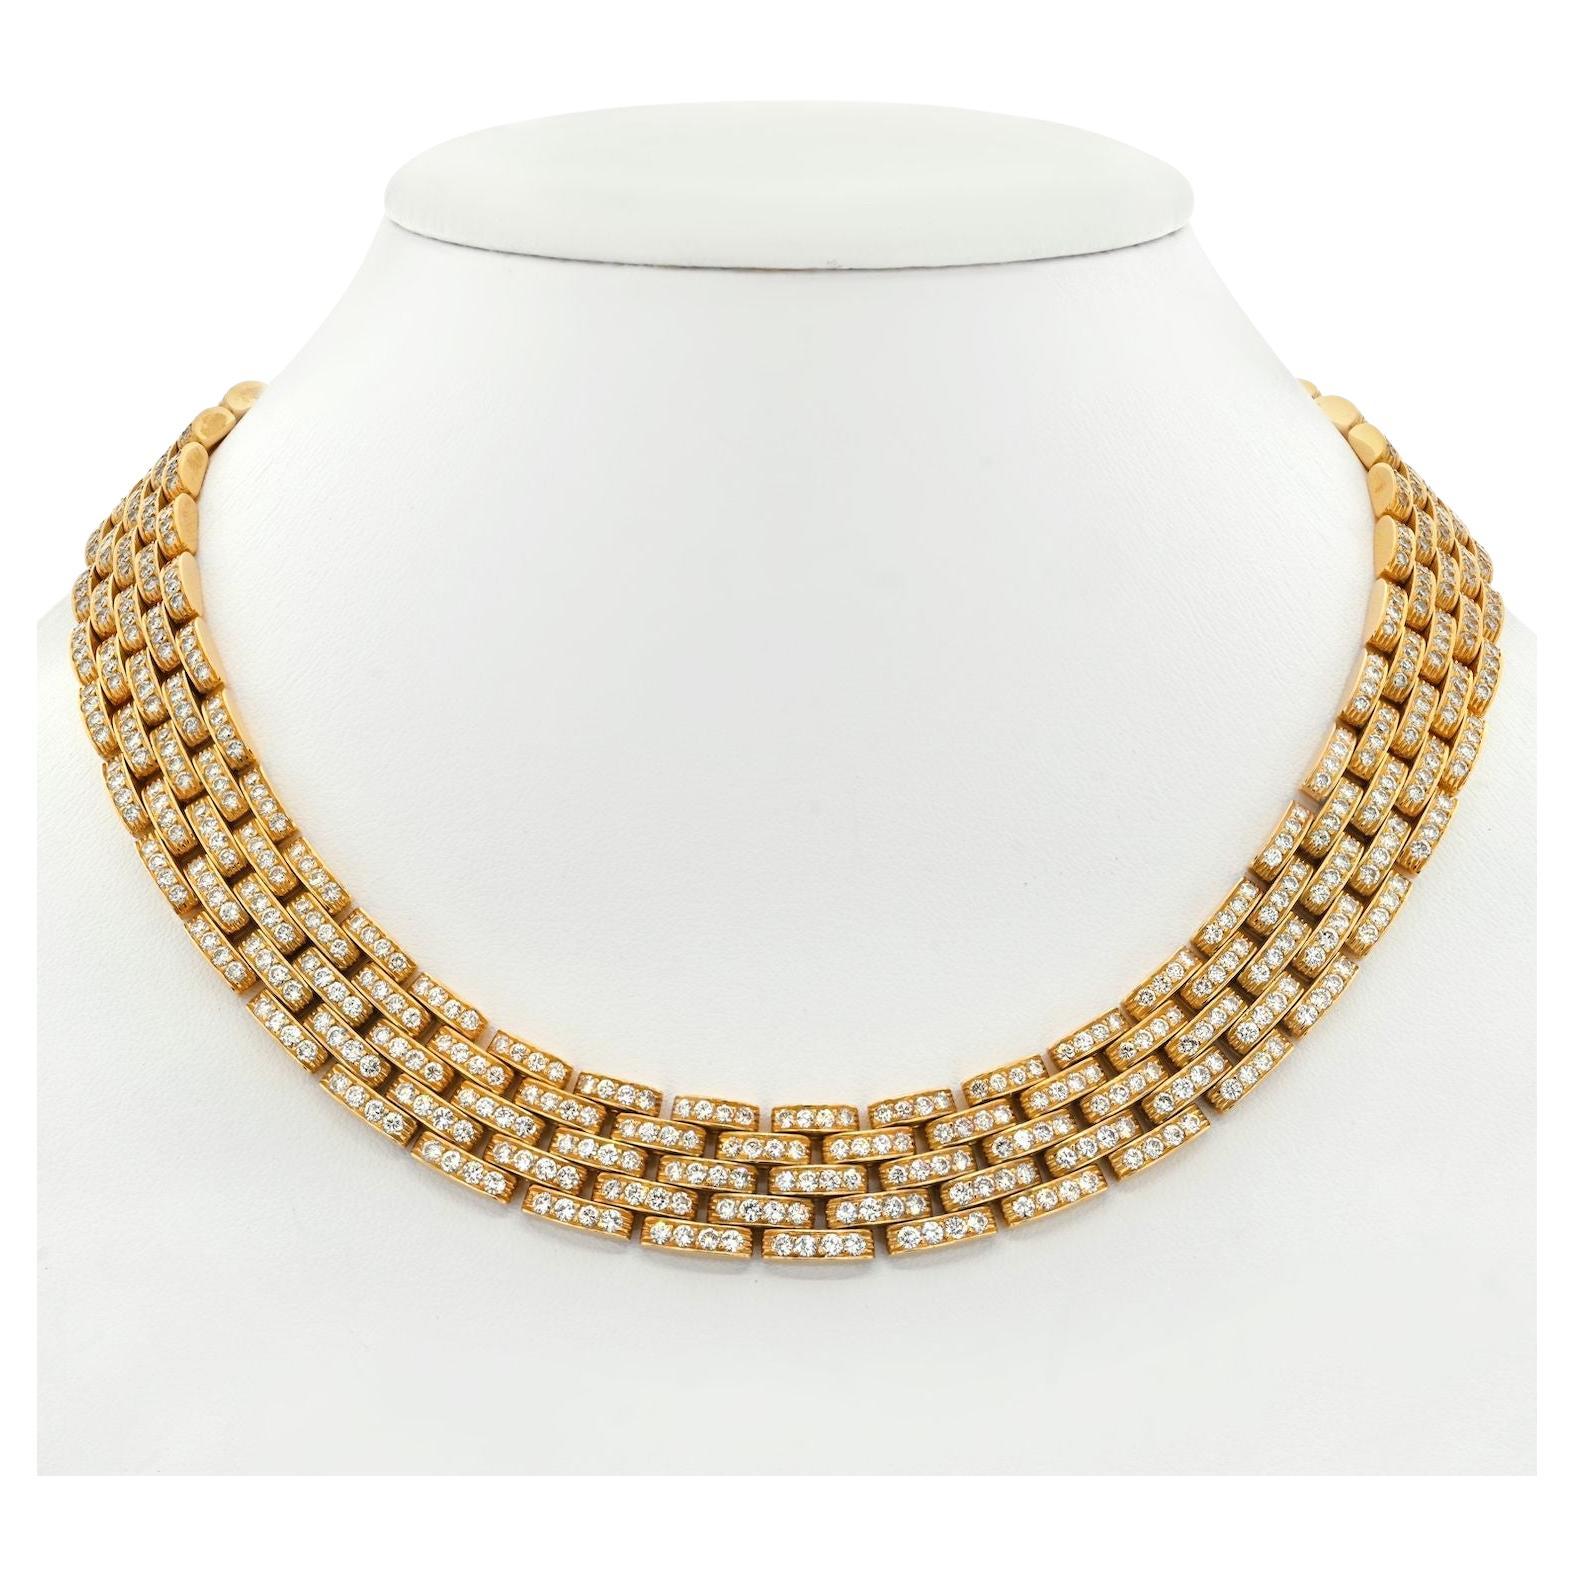 Cartier 18K Yellow Gold Panthere Maillon Diamond Collar Necklace